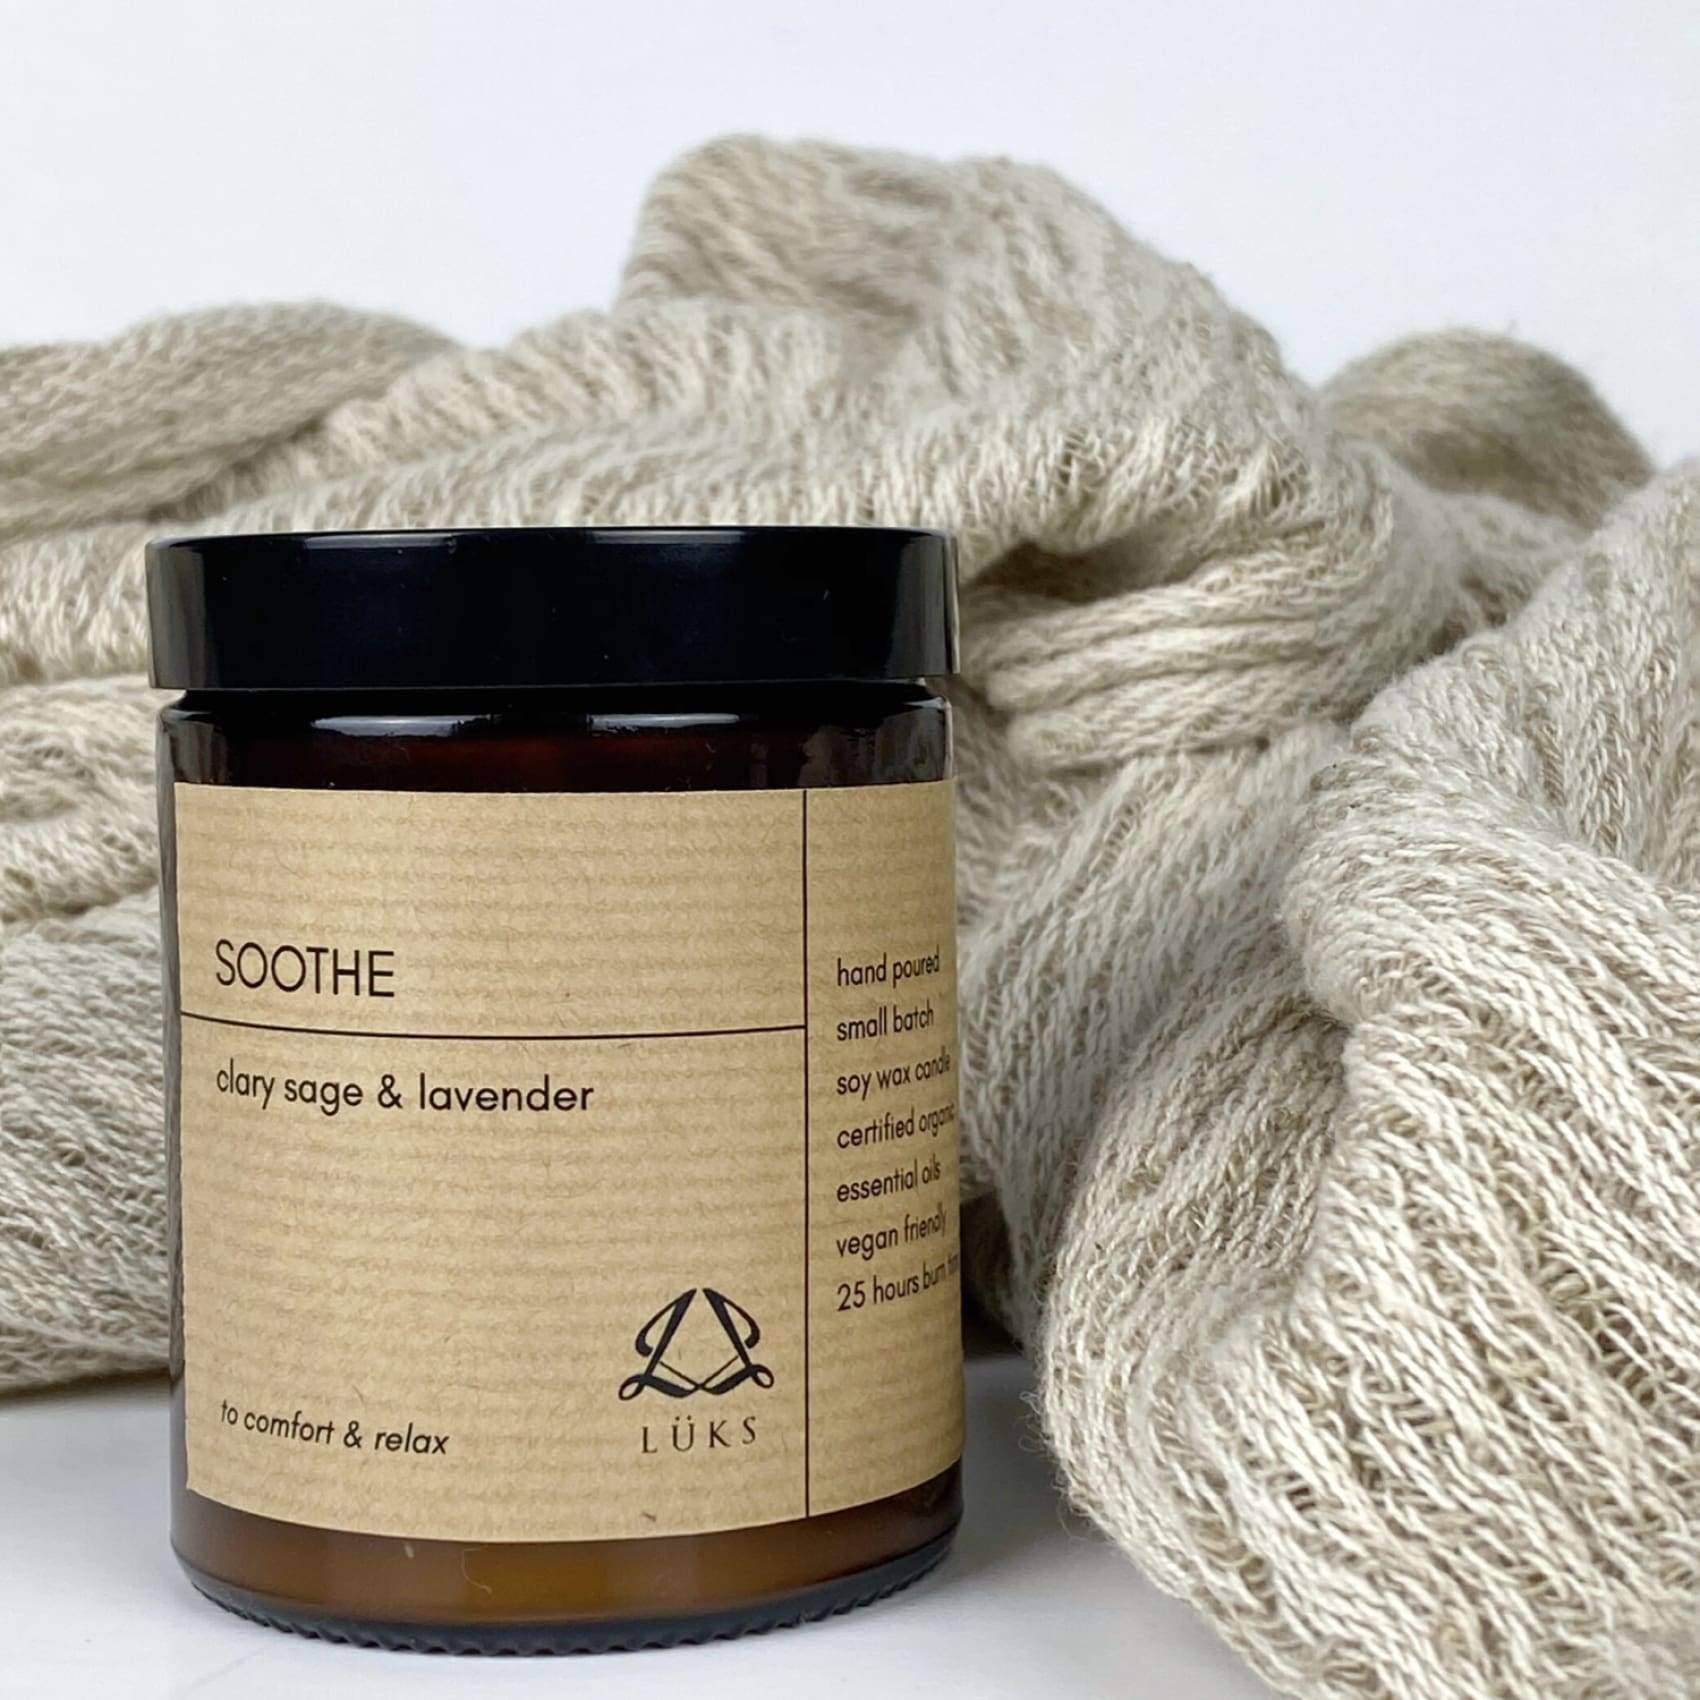 soothe-clary-sage-lavender-soy-wax-candle-candles-luks-linen-wool-twine-thread-404.jpg